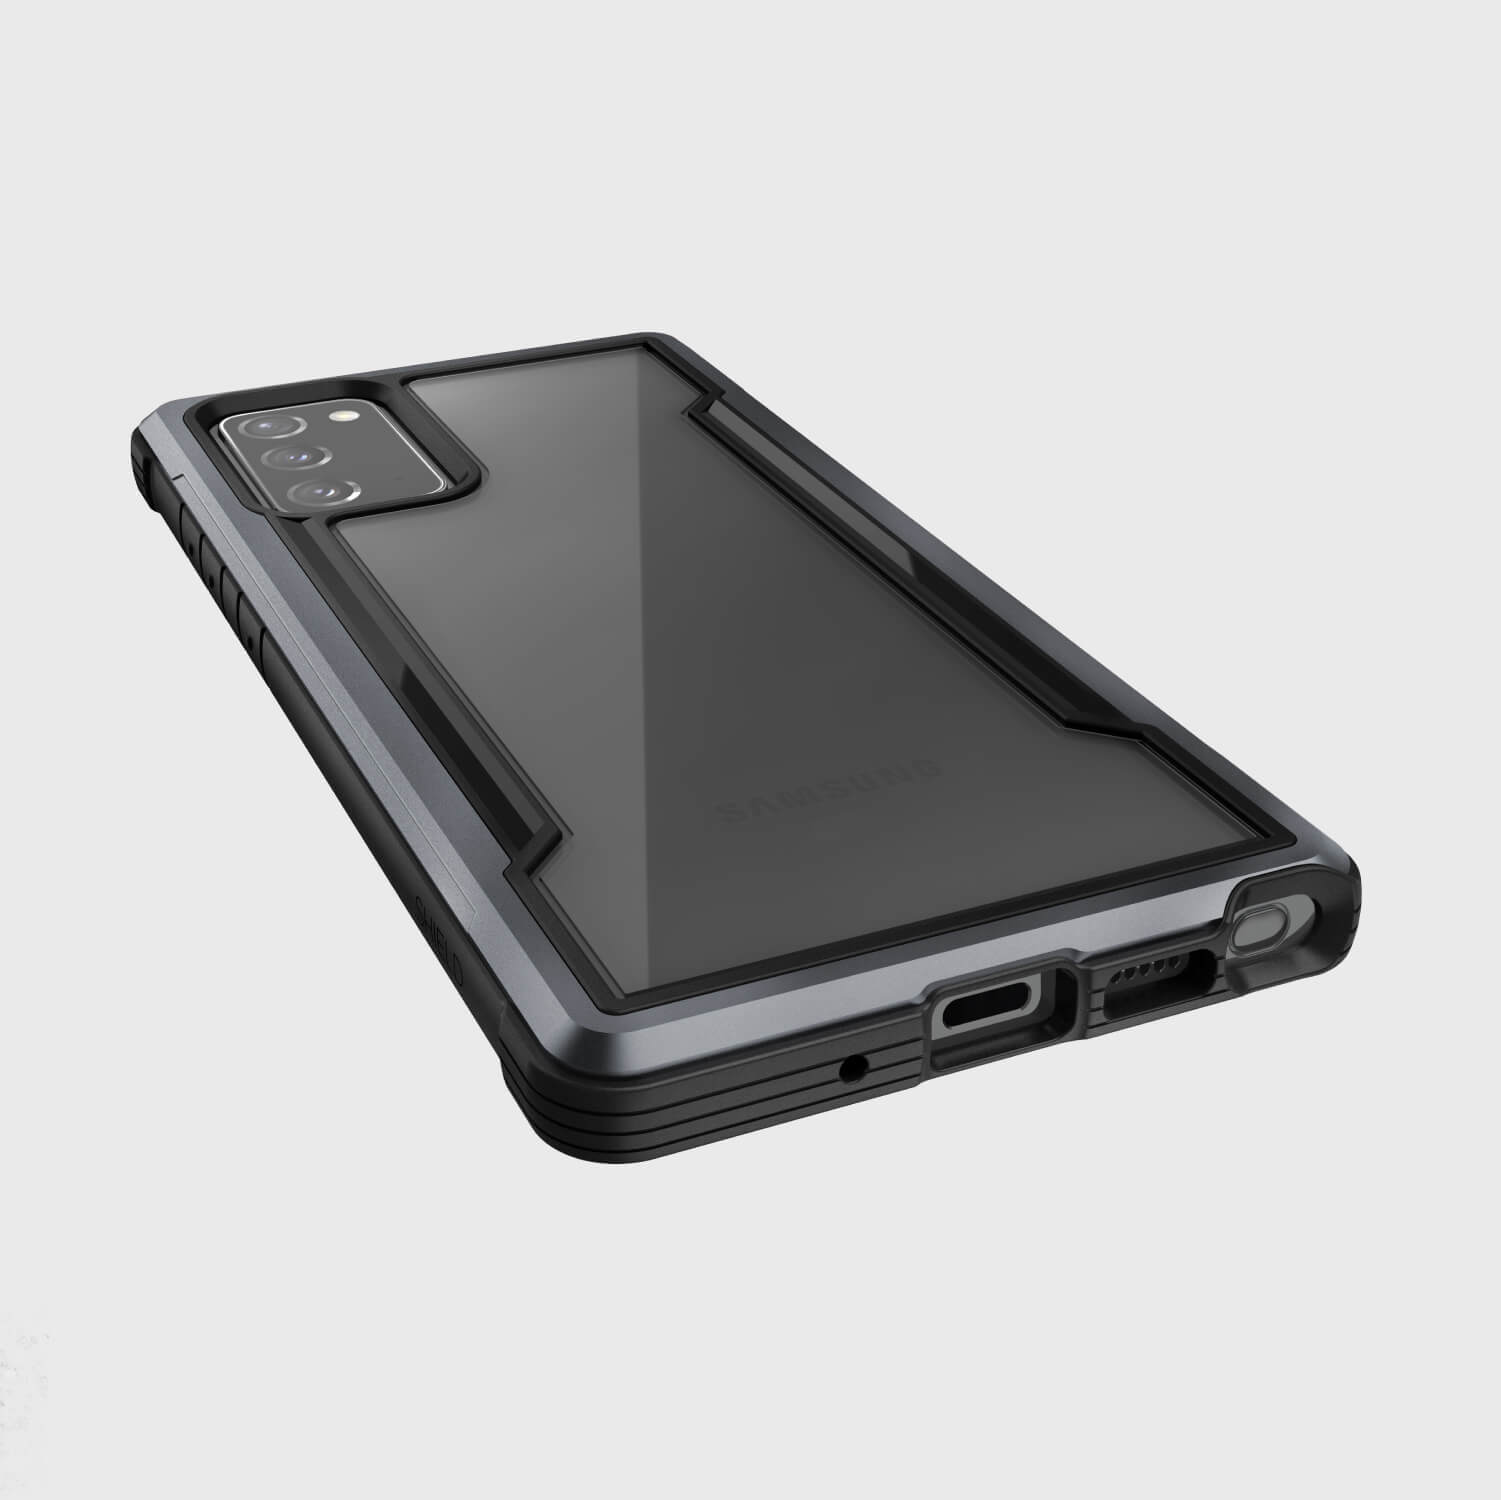 The back view of the Raptic Galaxy Note 20 Case - SHIELD Black showcases its military-grade design for ultimate drop protection. Additionally, the case offers wireless charging compatibility for added convenience.